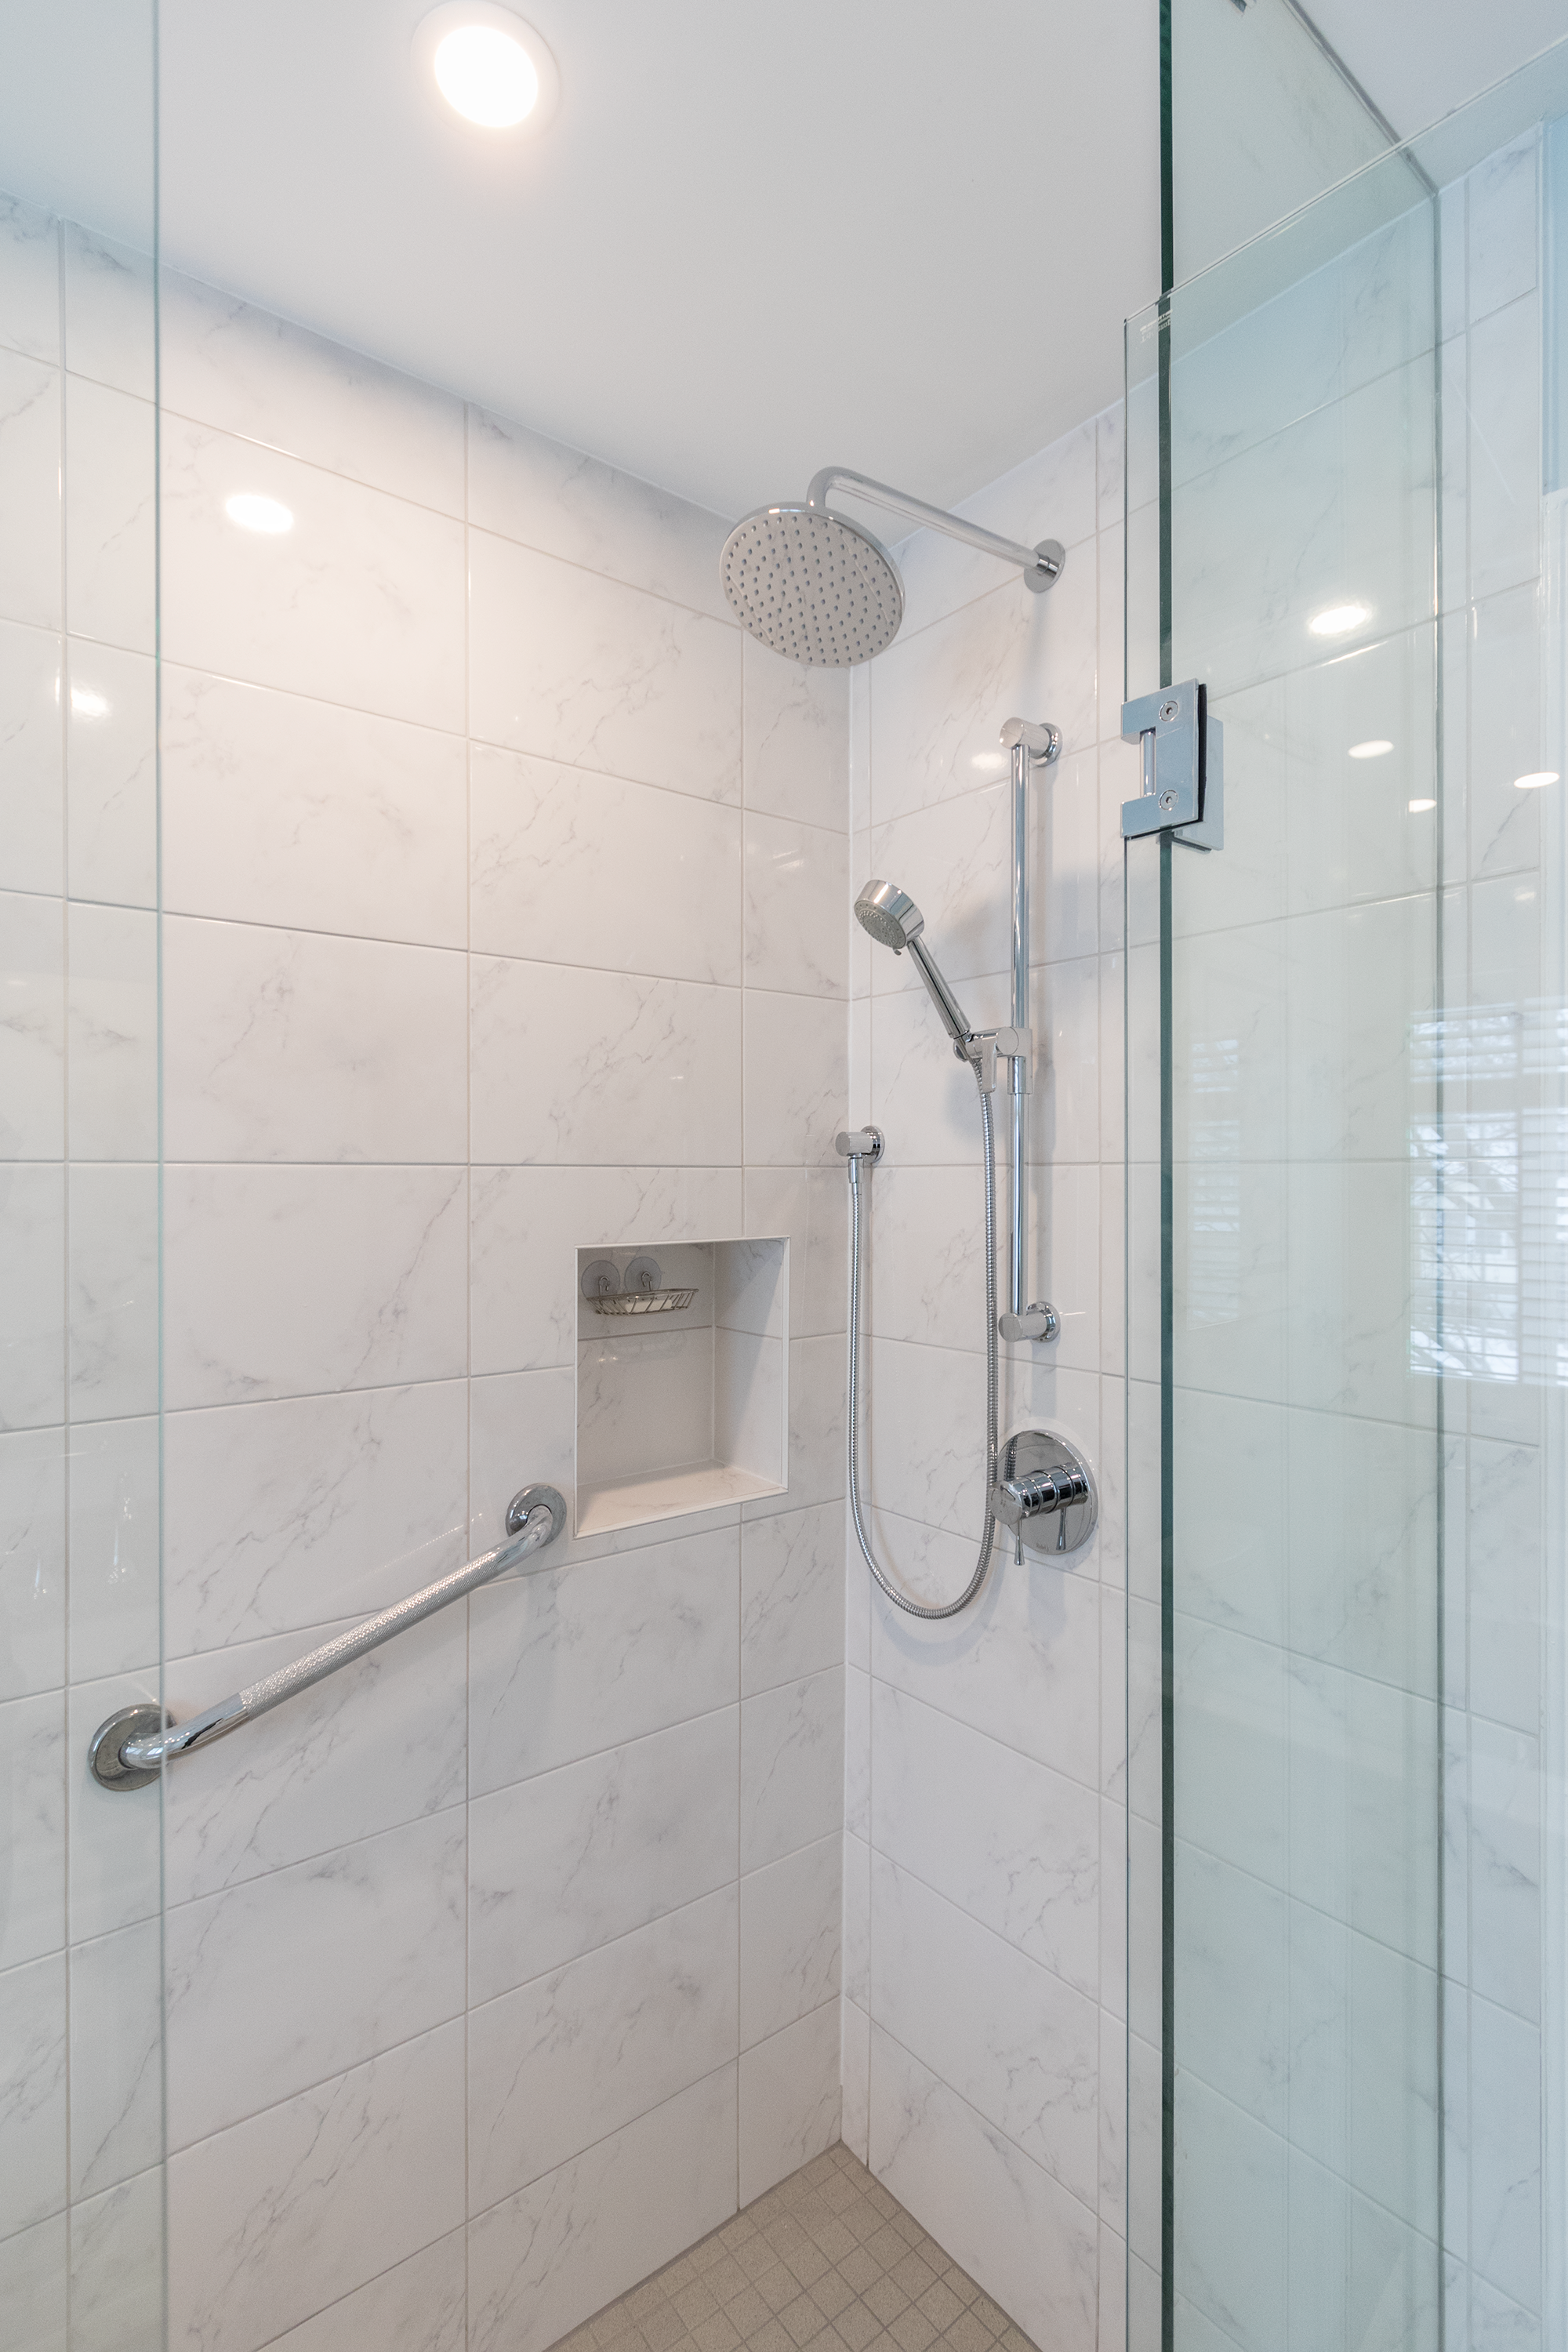 Converting Your Tub To A Walk In Shower, Replacing A Shower With Bathtub